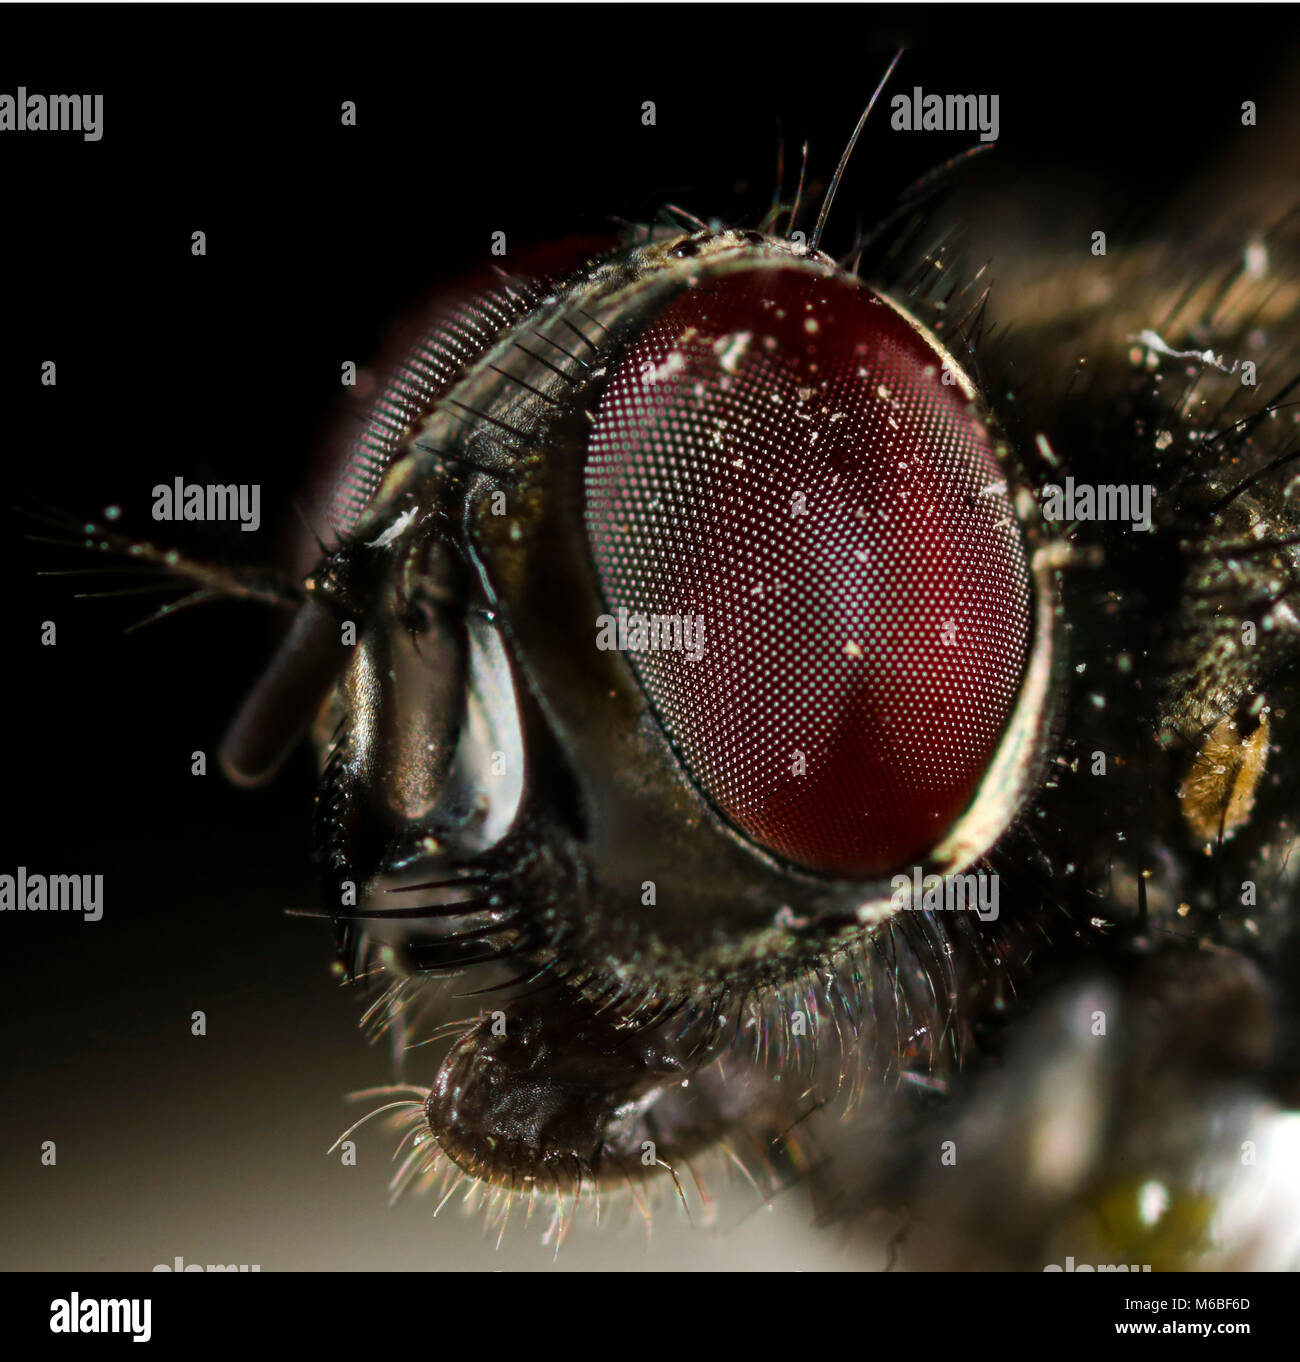 Fly-close up Foto Stock